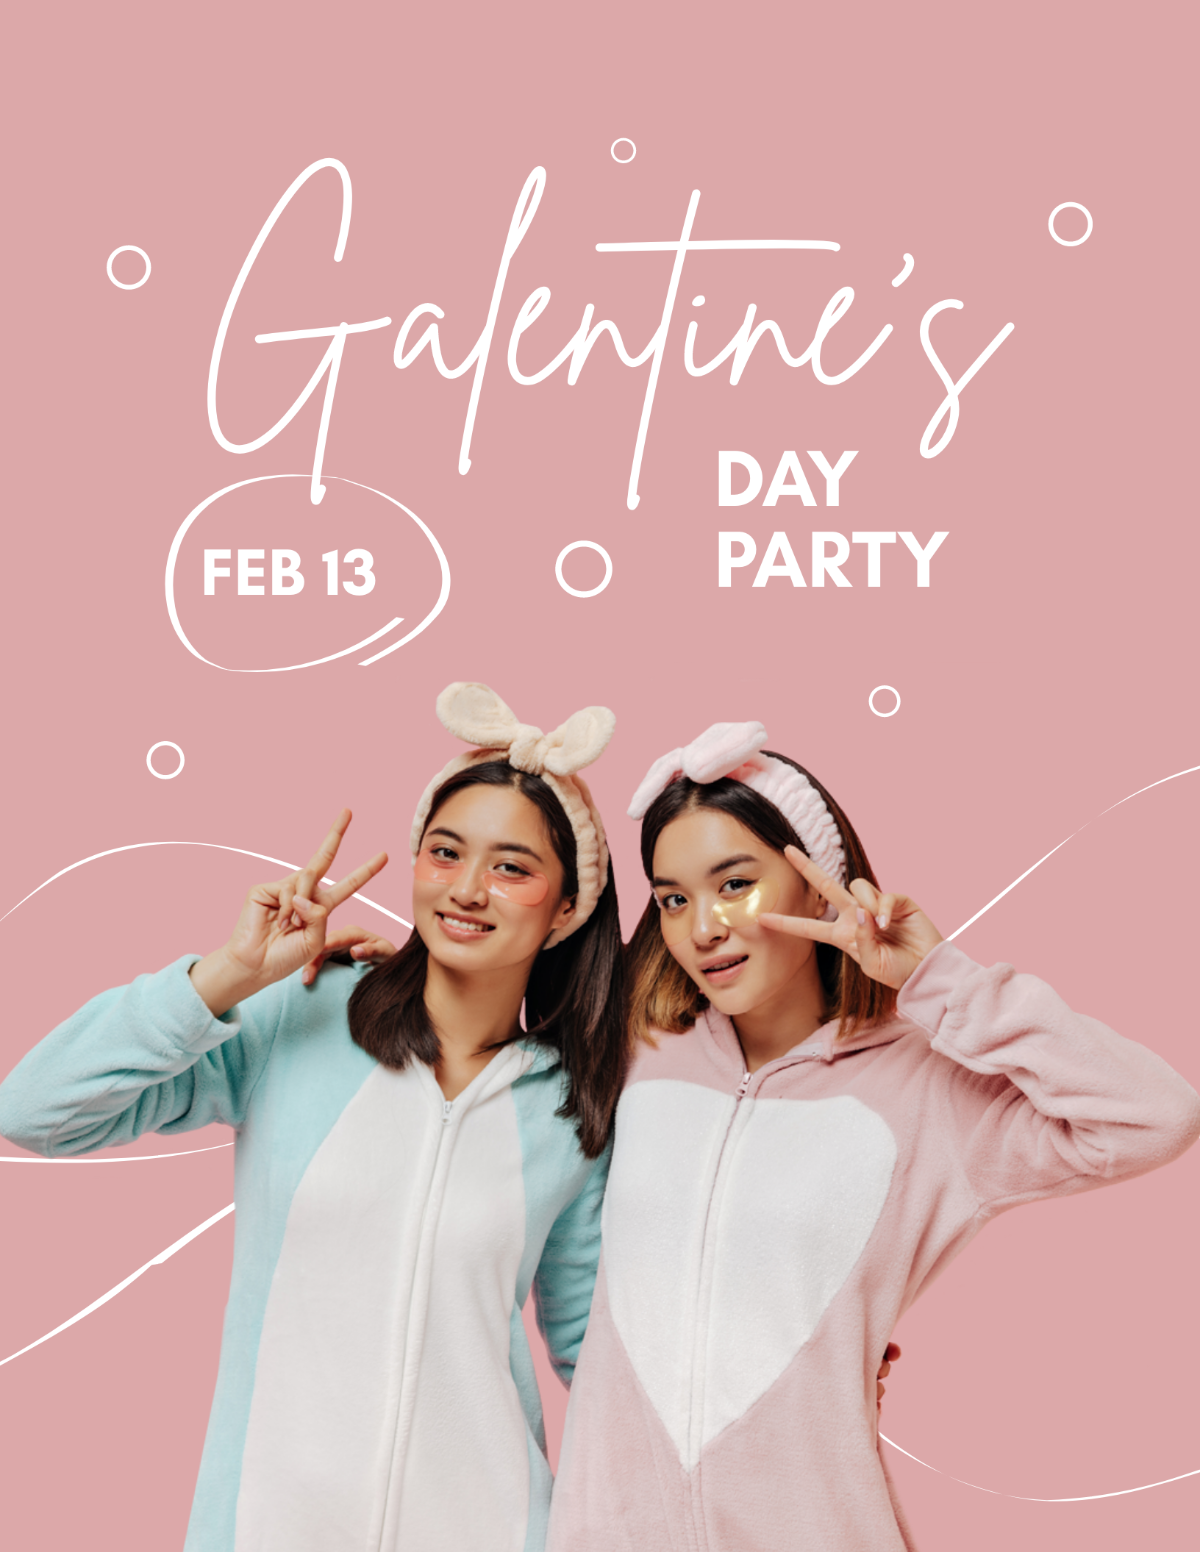 Galentines Day Party Flyer